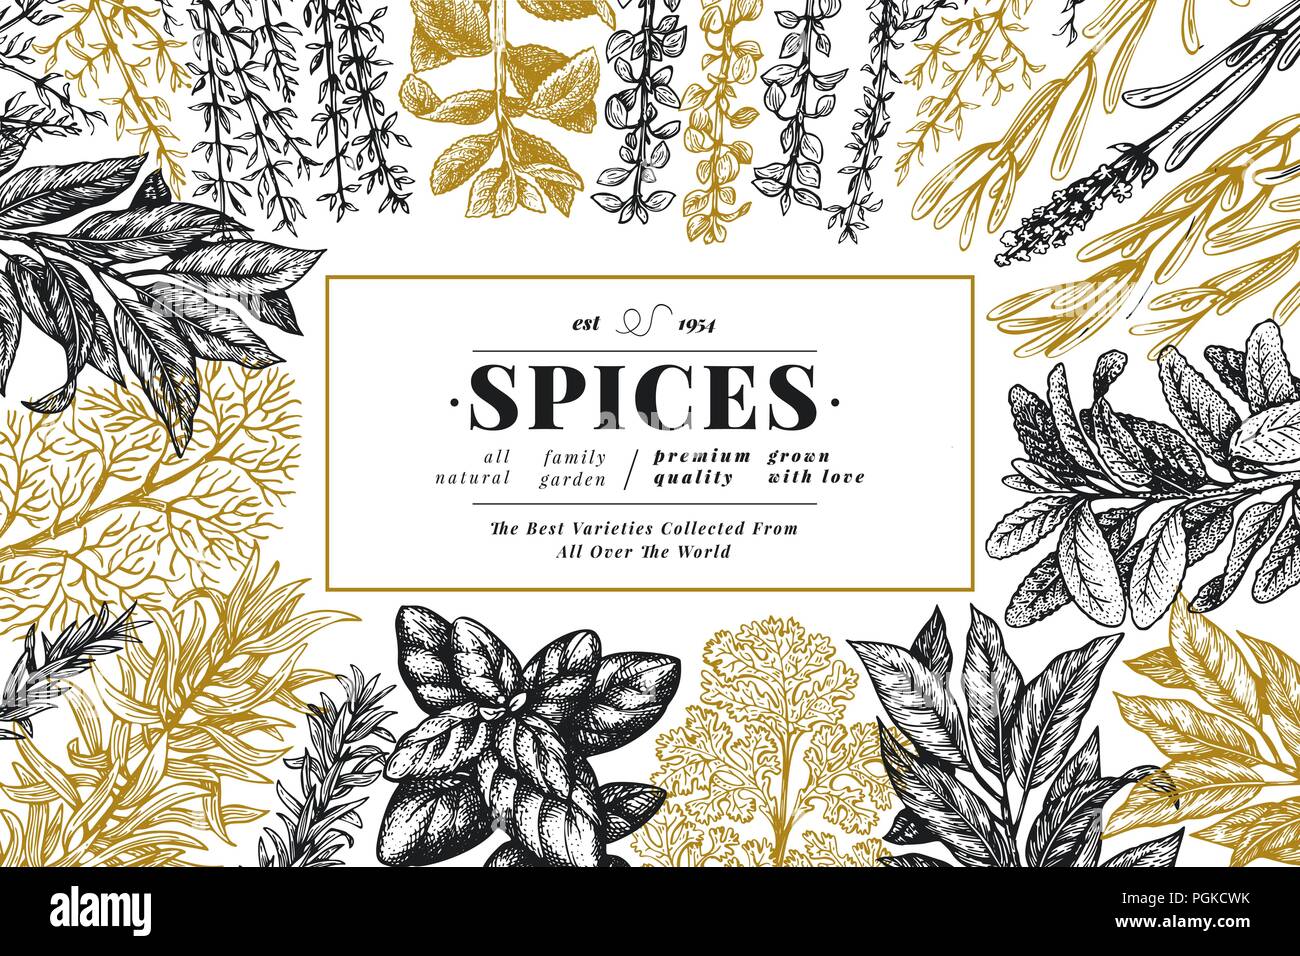 Culinary herbs and spices banner template. Vector background for design menu, packaging, recipes, label, farm market products. Hand drawn retro botani Stock Vector